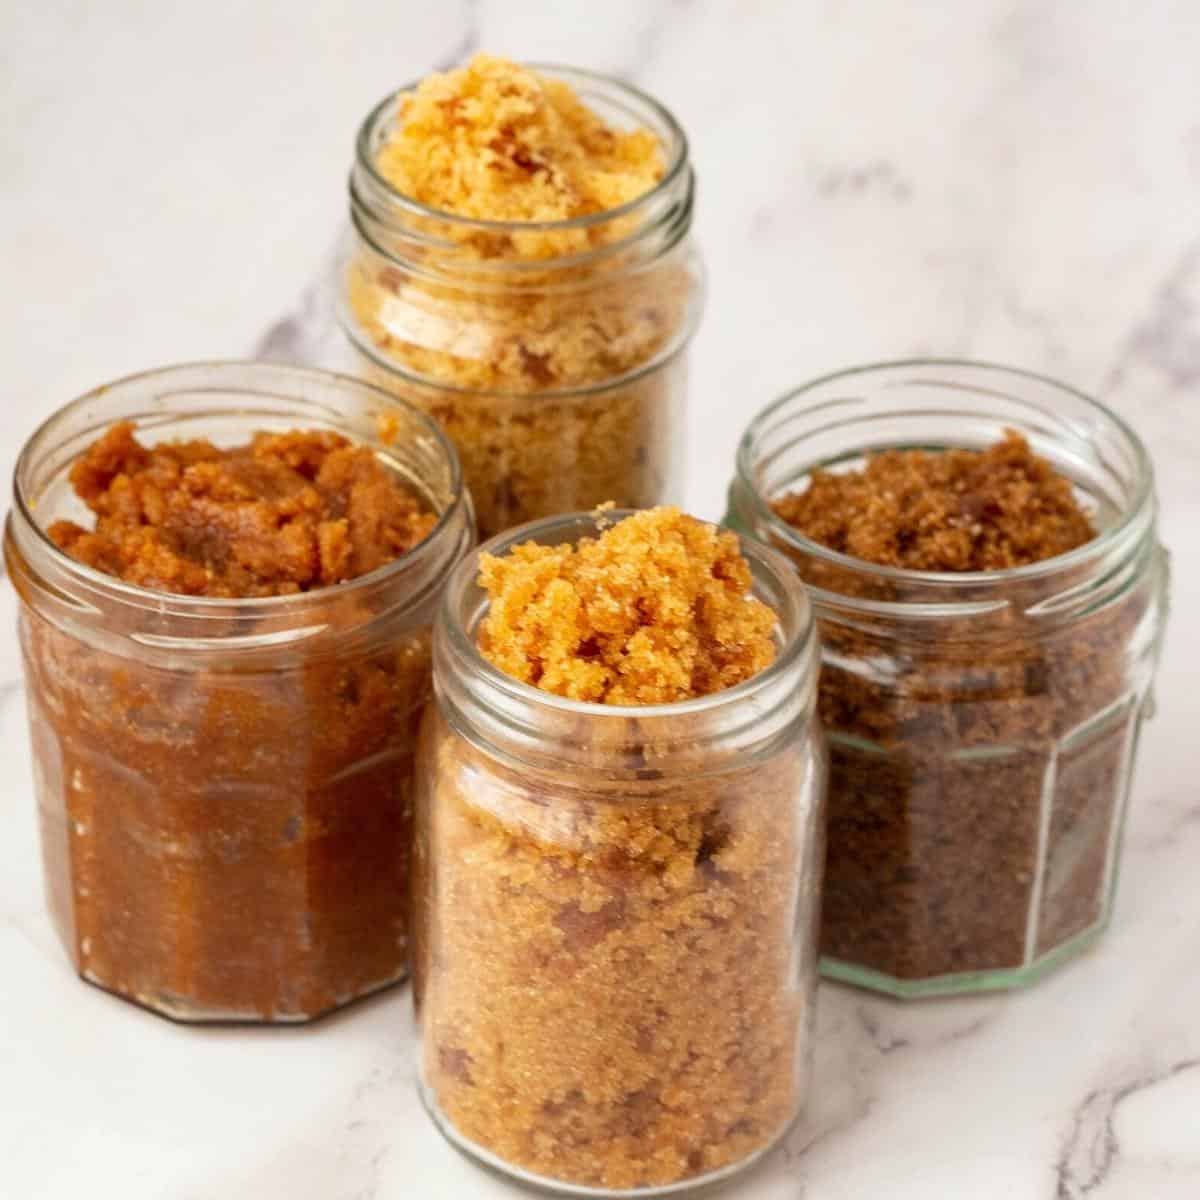 Four jars with brown sugar.